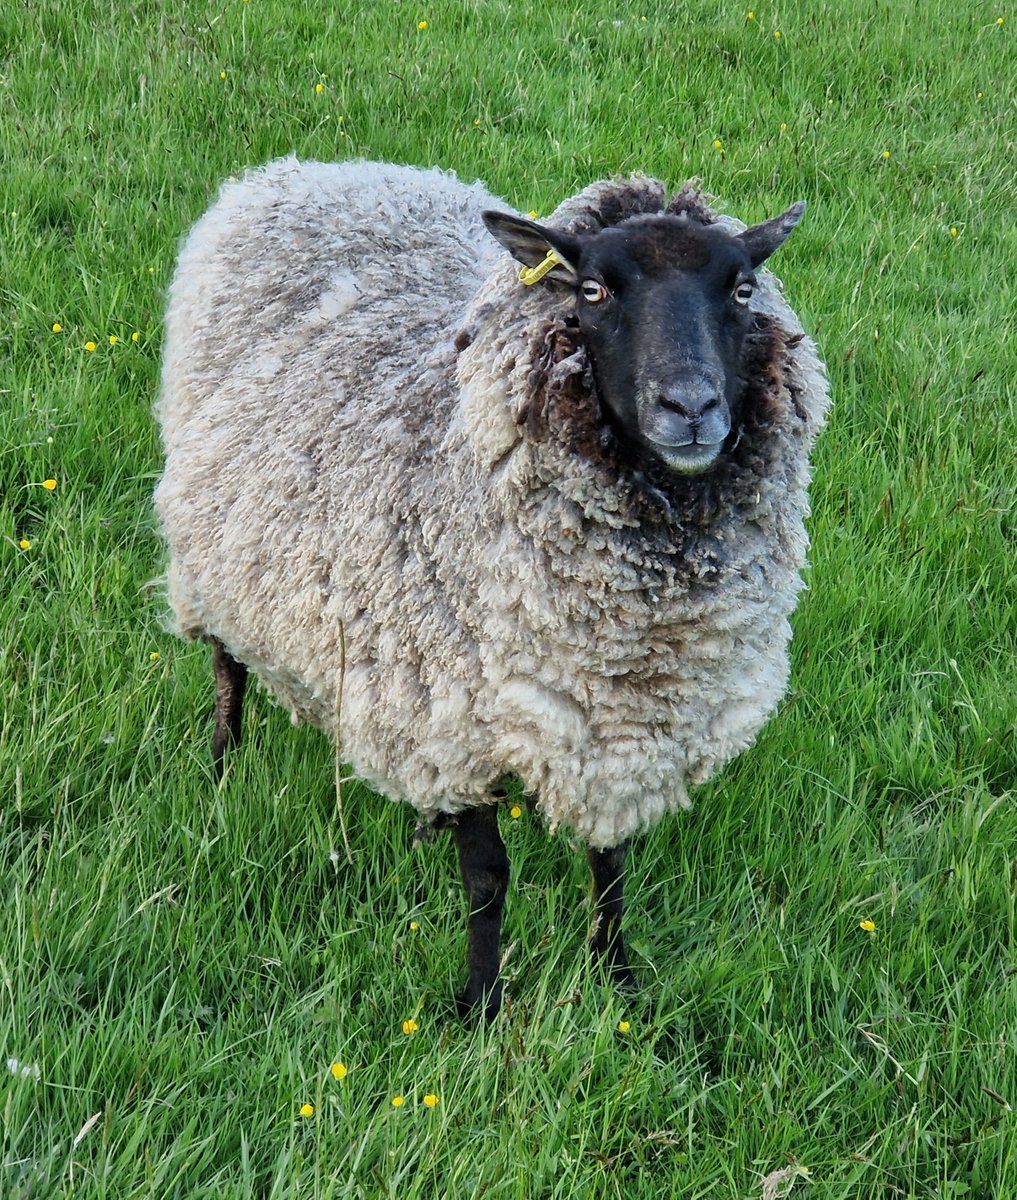 Fluffball Dillon 💙
He can be a bit of a twit on occasions but underneath it all he's a little sweetheart who just wants a biccit and to be loved 🐑

#animalsanctuary #shetlandsheep #wool #fleece #nonprofit #amazonwishlist #animallovers #foreverhome 

amazon.co.uk/gp/registry/wi…